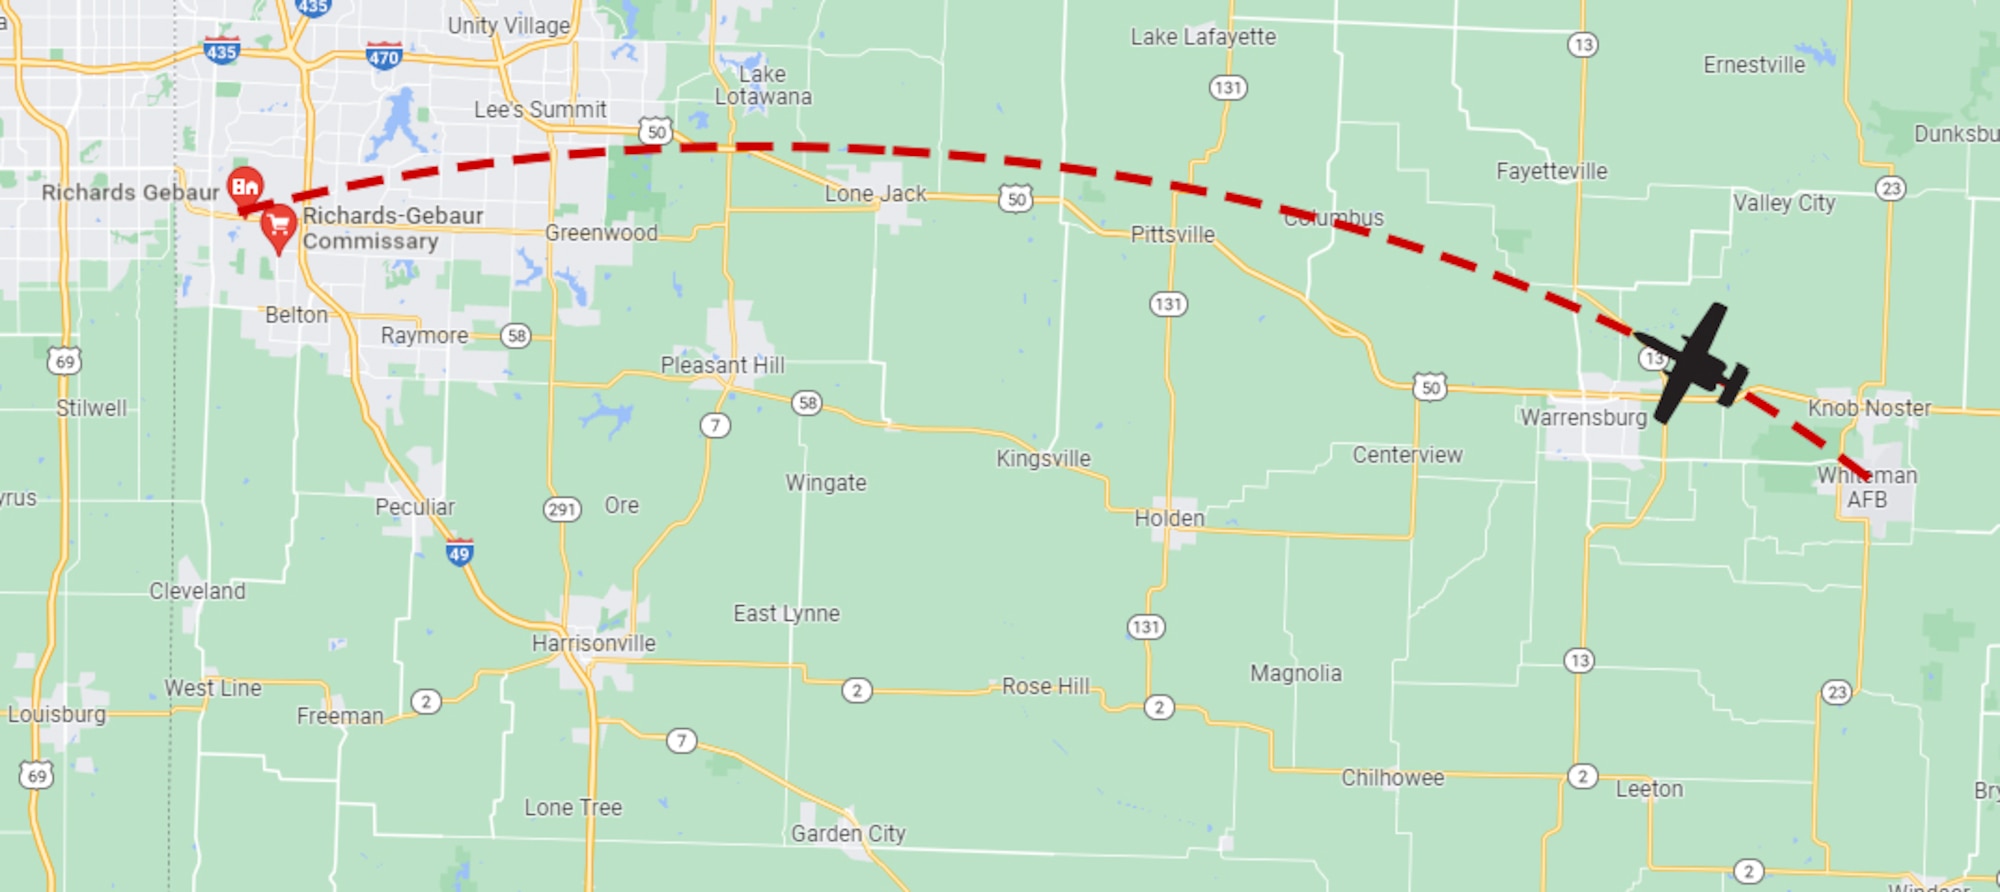 A dashed line represents a flight path between Whiteman Air Force Base and Richards-Gebaur Air Reserve Station with an A-10 silhouette "flying" along it.